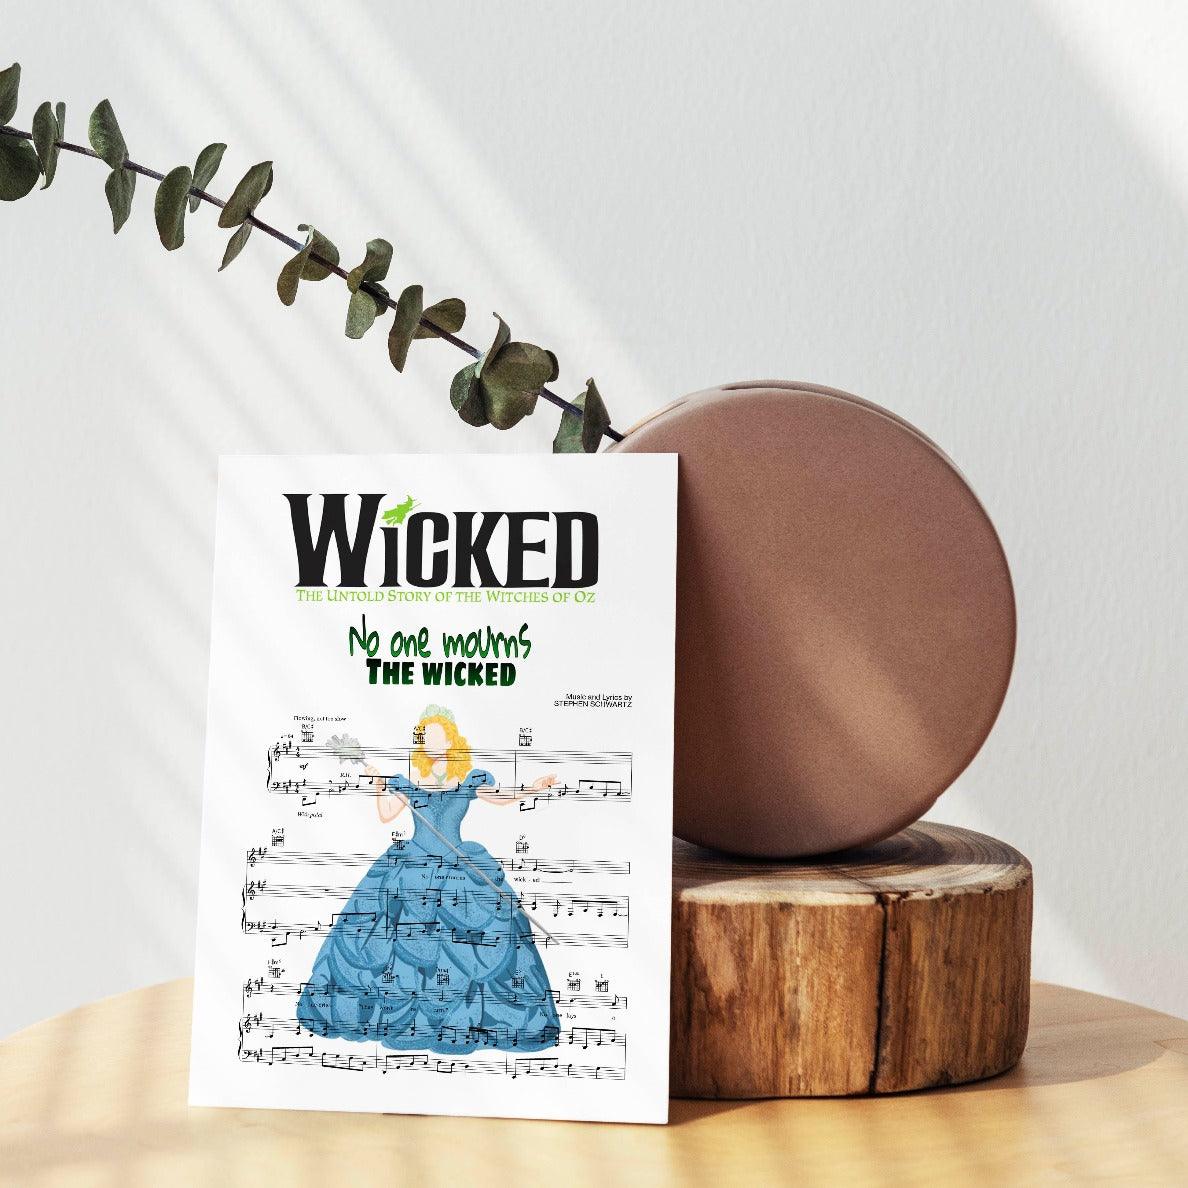 Hang this beautifully designed and hand-crafted poster in your home to show your love for the music of Wicked. This gorgeous poster features the song lyrics from Wicked - NO ONE MOURNS THE WICKED. Perfect for any fan of the musical Wicked, this poster is a must-have for your collection.